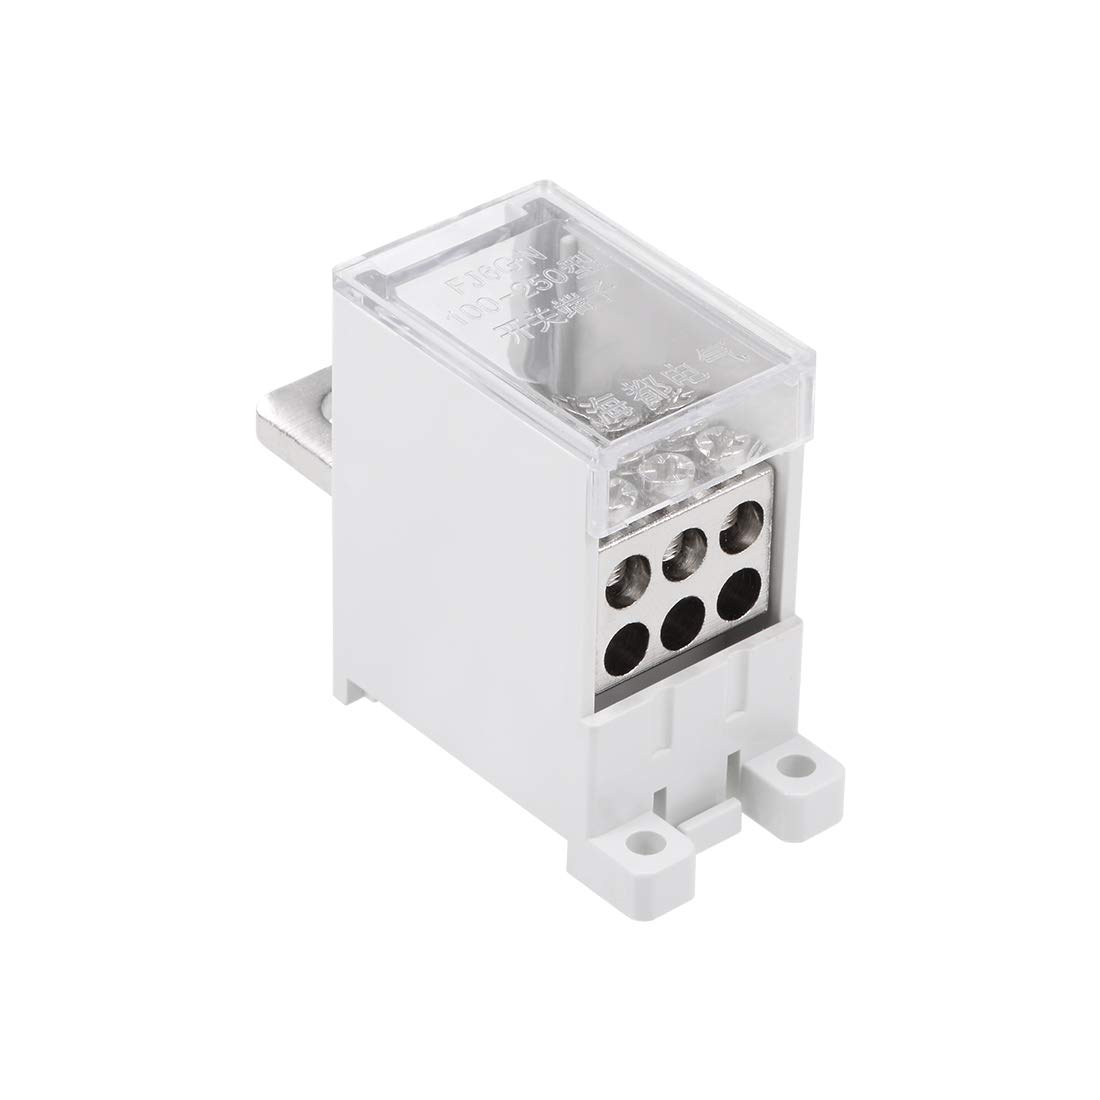 uxcell 1 in 6 Out DIN Rail Terminal Blocks 690V 250A Max Input Distribution Block for Circuit Breaker